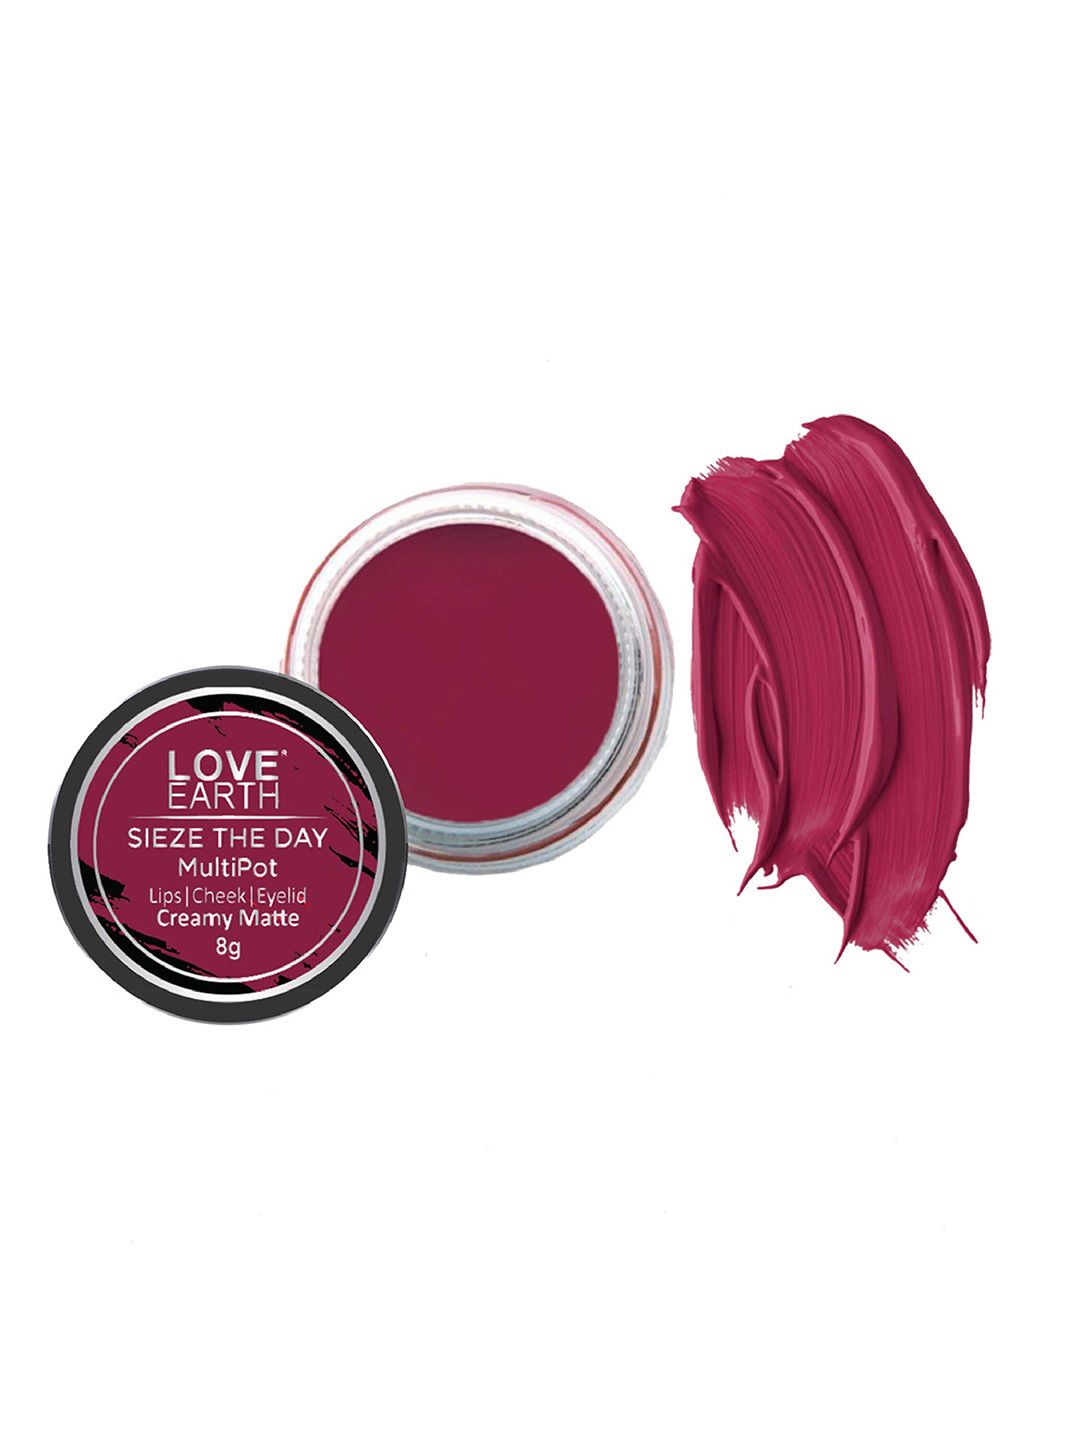 LOVE EARTH Multipot Creamy Matte Lip-Cheek-Eyelid Tint - Sieze The Day Price in India